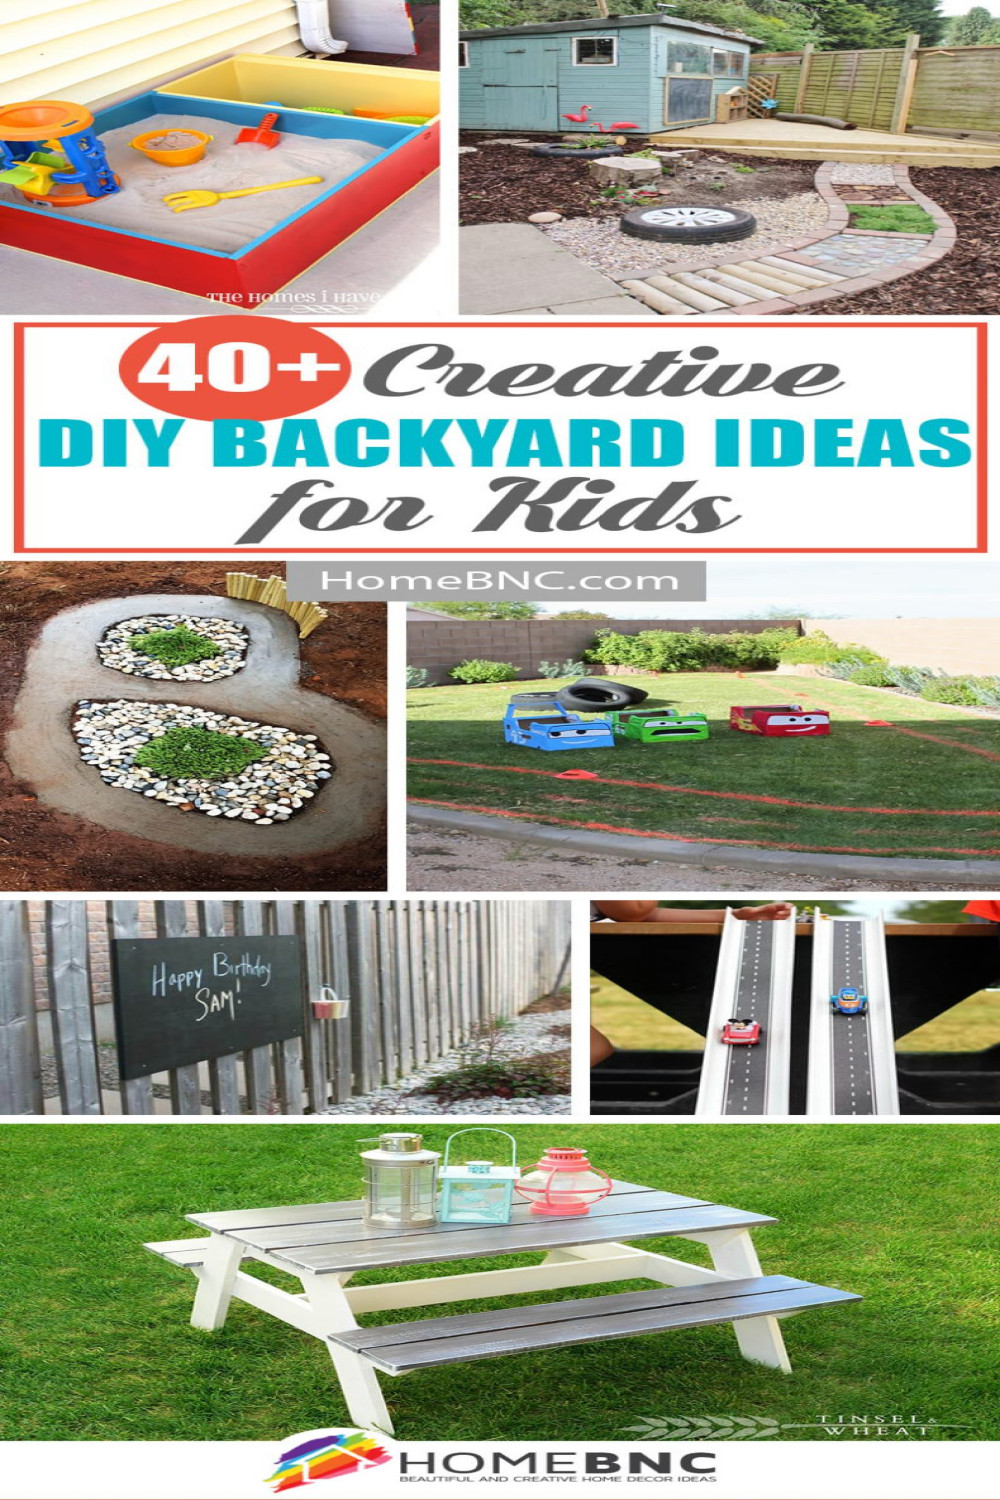 + Best DIY Backyard Ideas and Designs for Kids in